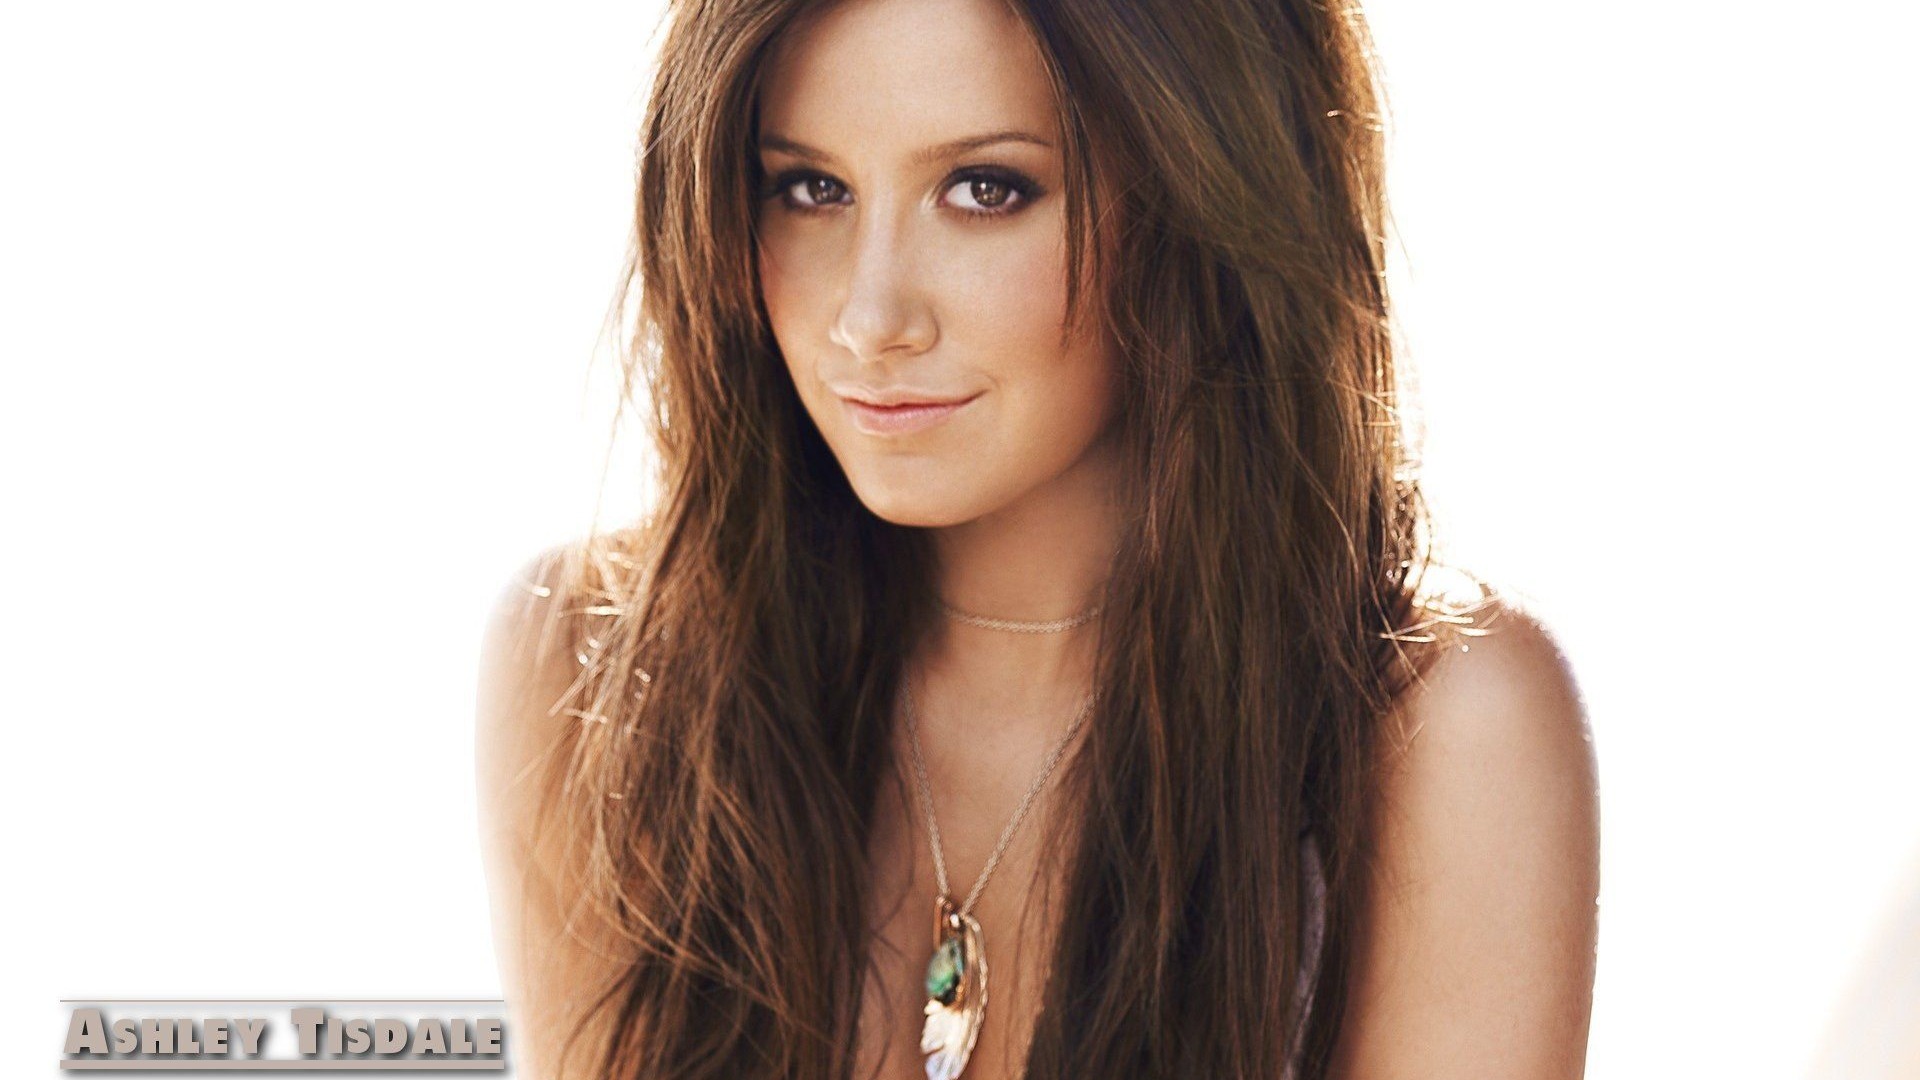 Ashley Tisdale #002 - 1920x1080 Wallpapers Pictures Photos Images